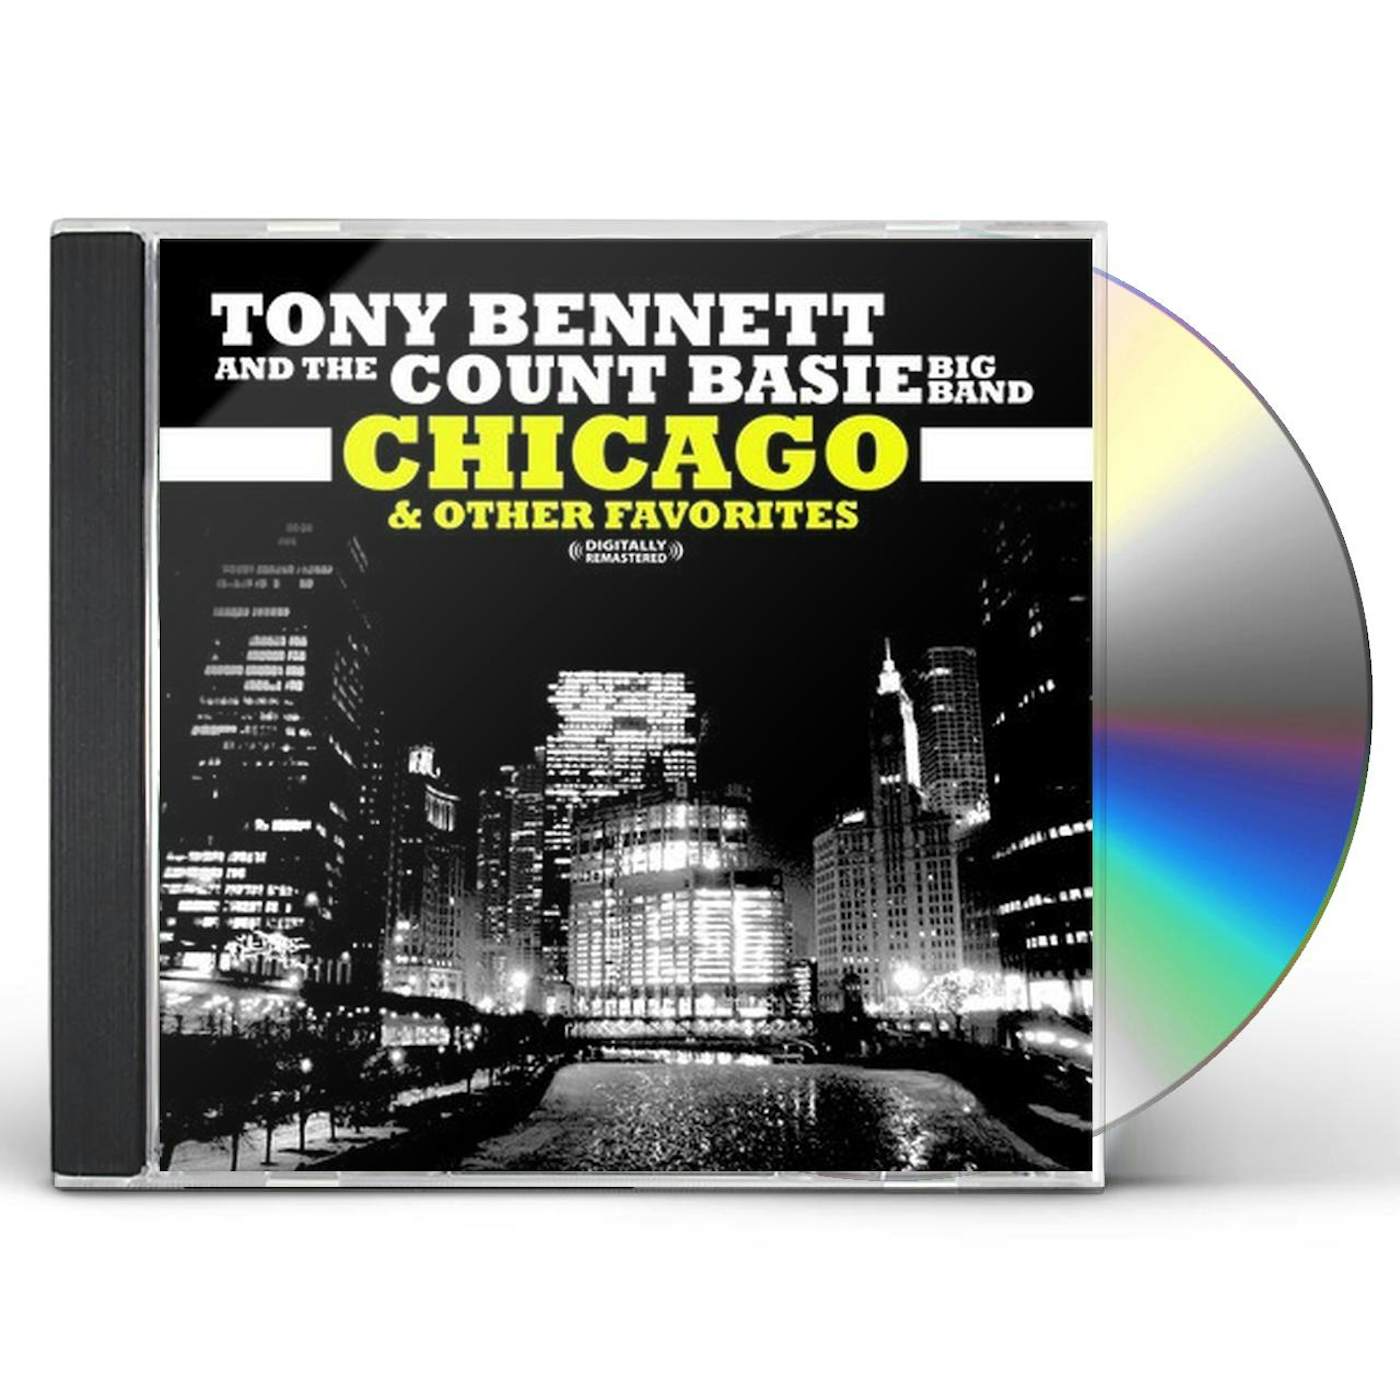 Tony Bennett & The Count Basie Orchestra CHICAGO & OTHER FAVORITES CD